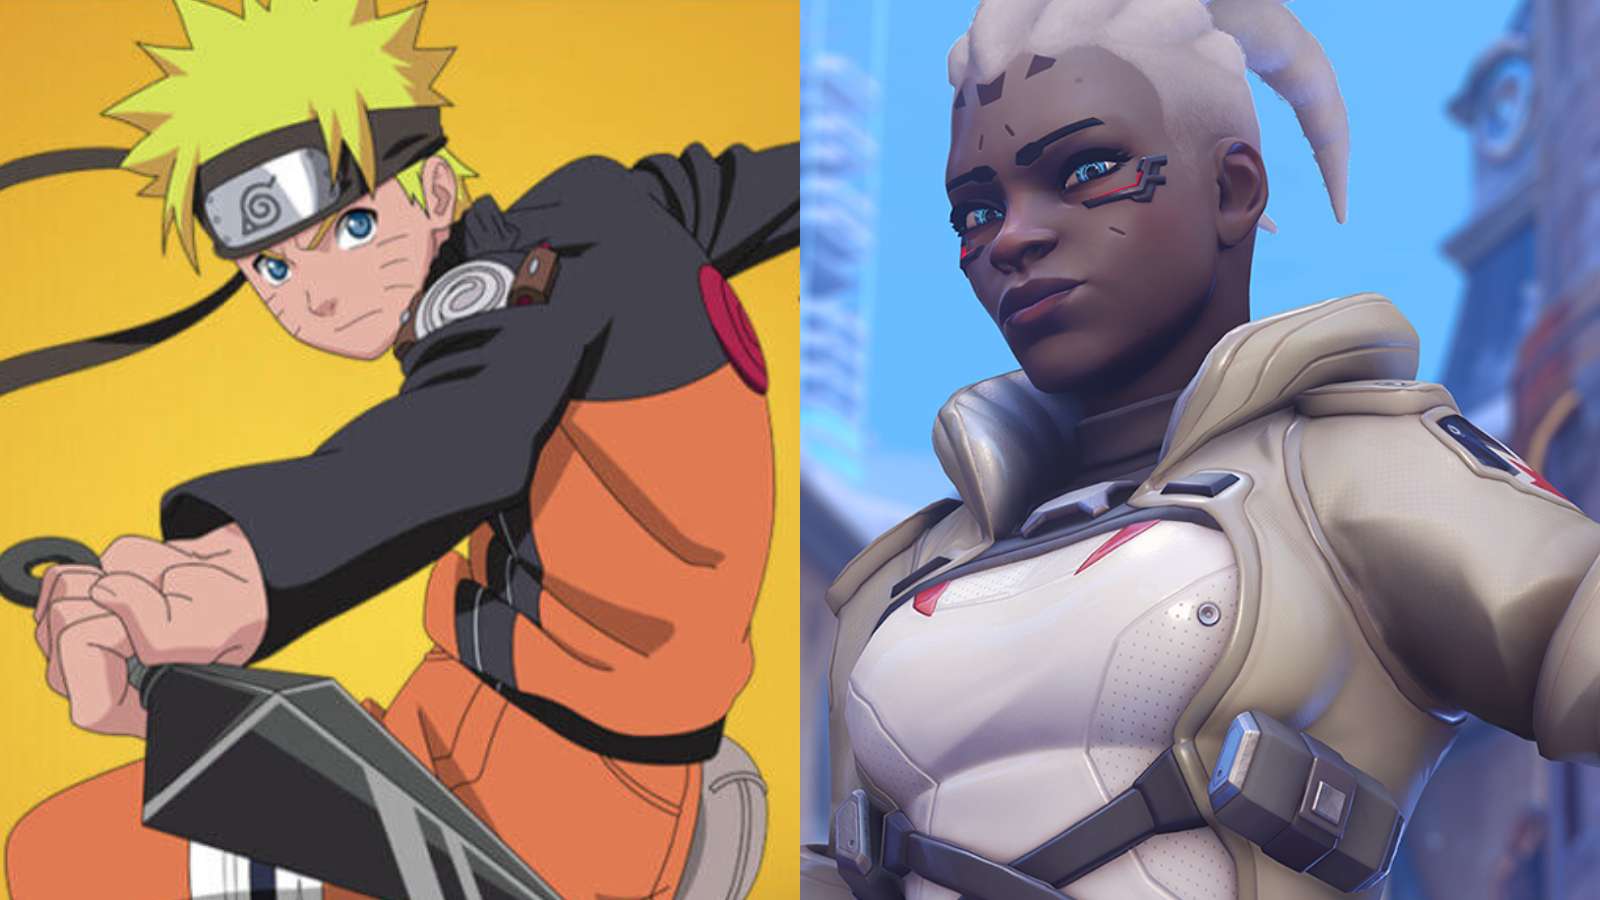 overwatch 2 could be more like fortnite